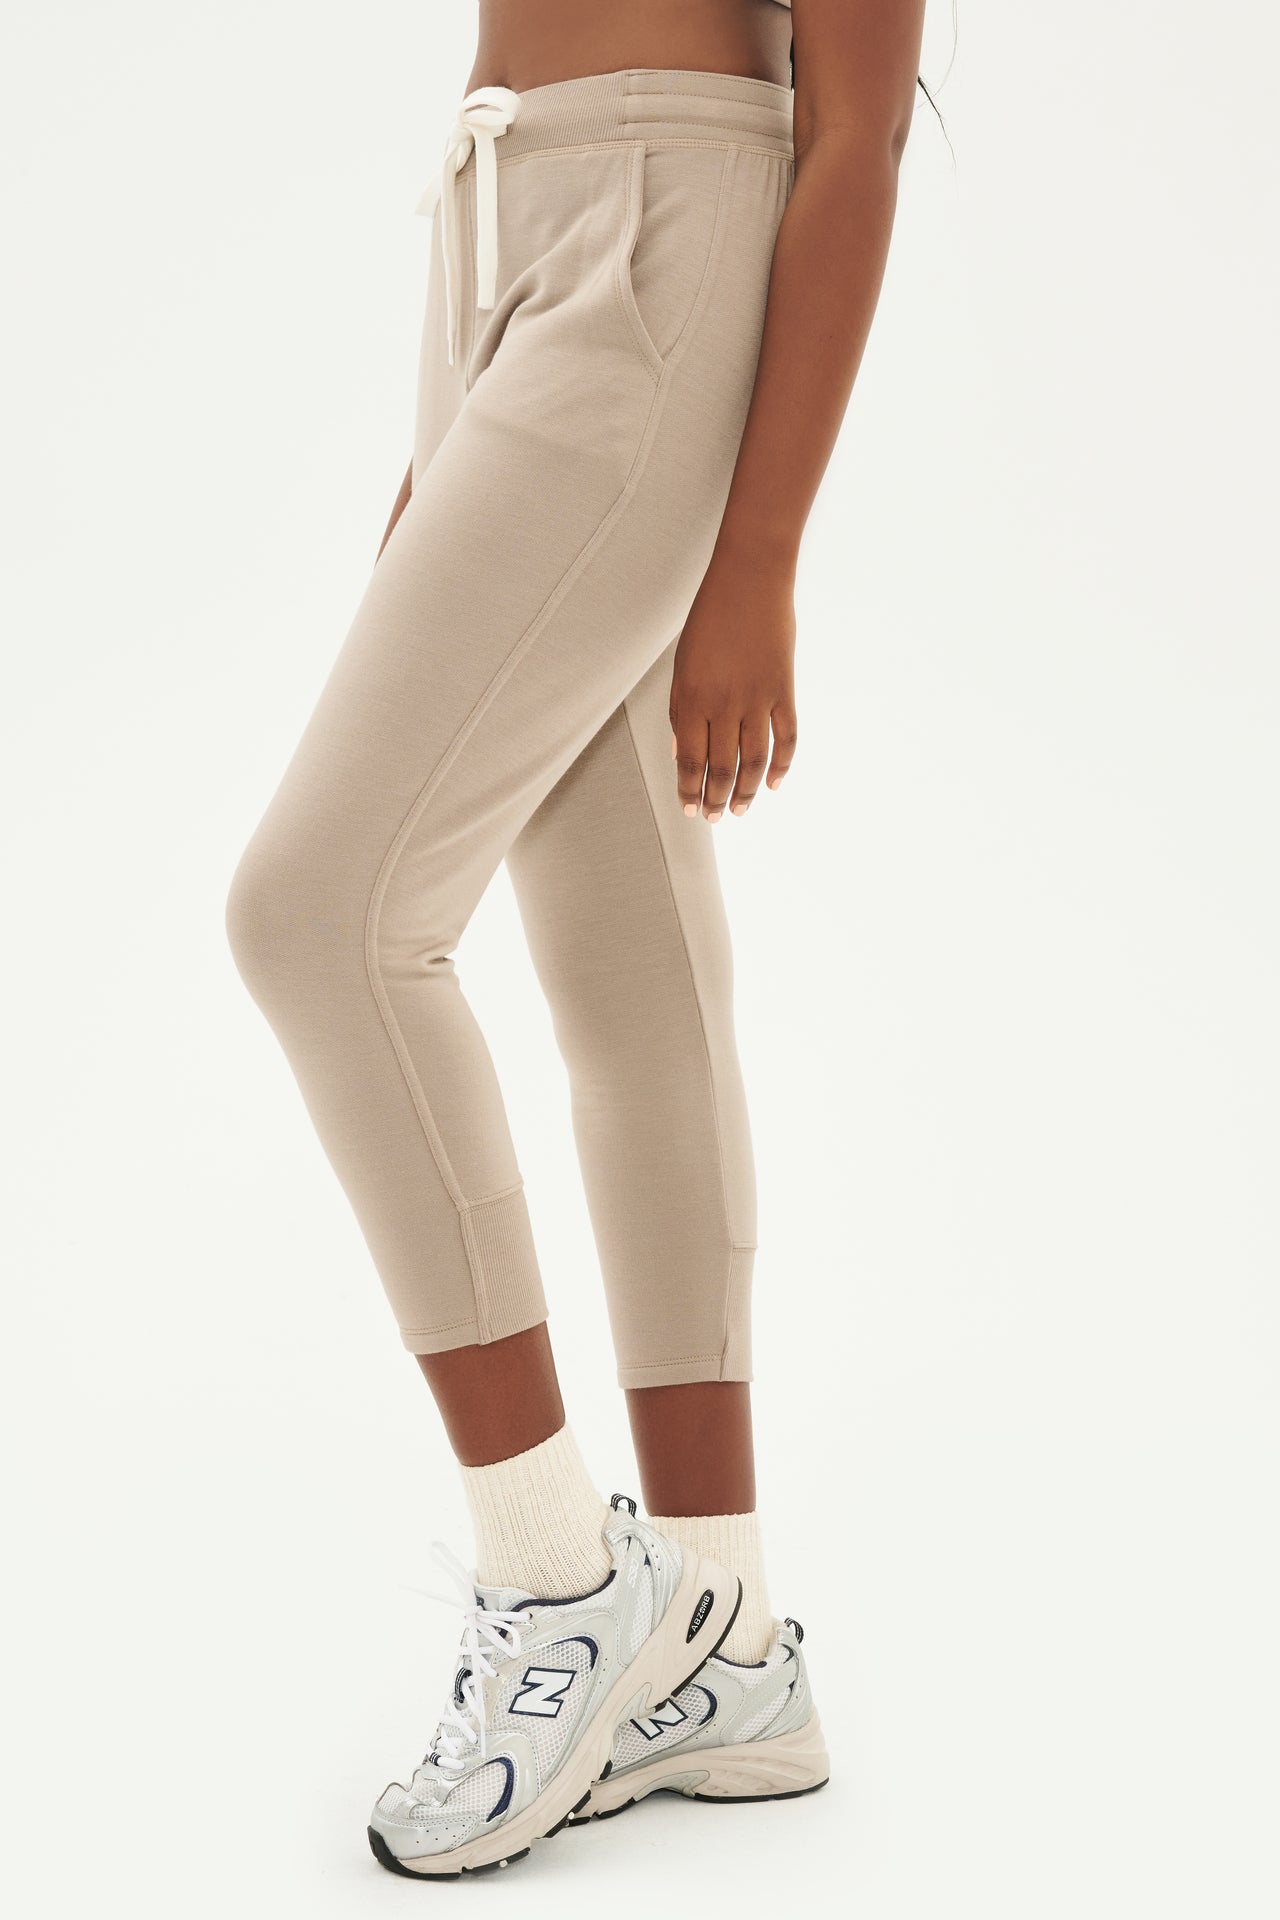 Front side view of woman wearing light brown creme tone crewneck sweatshirt and sweatpant with tapered leg and above ankle length with white drawstring and side hip pockets paired with white shoes with black stripes